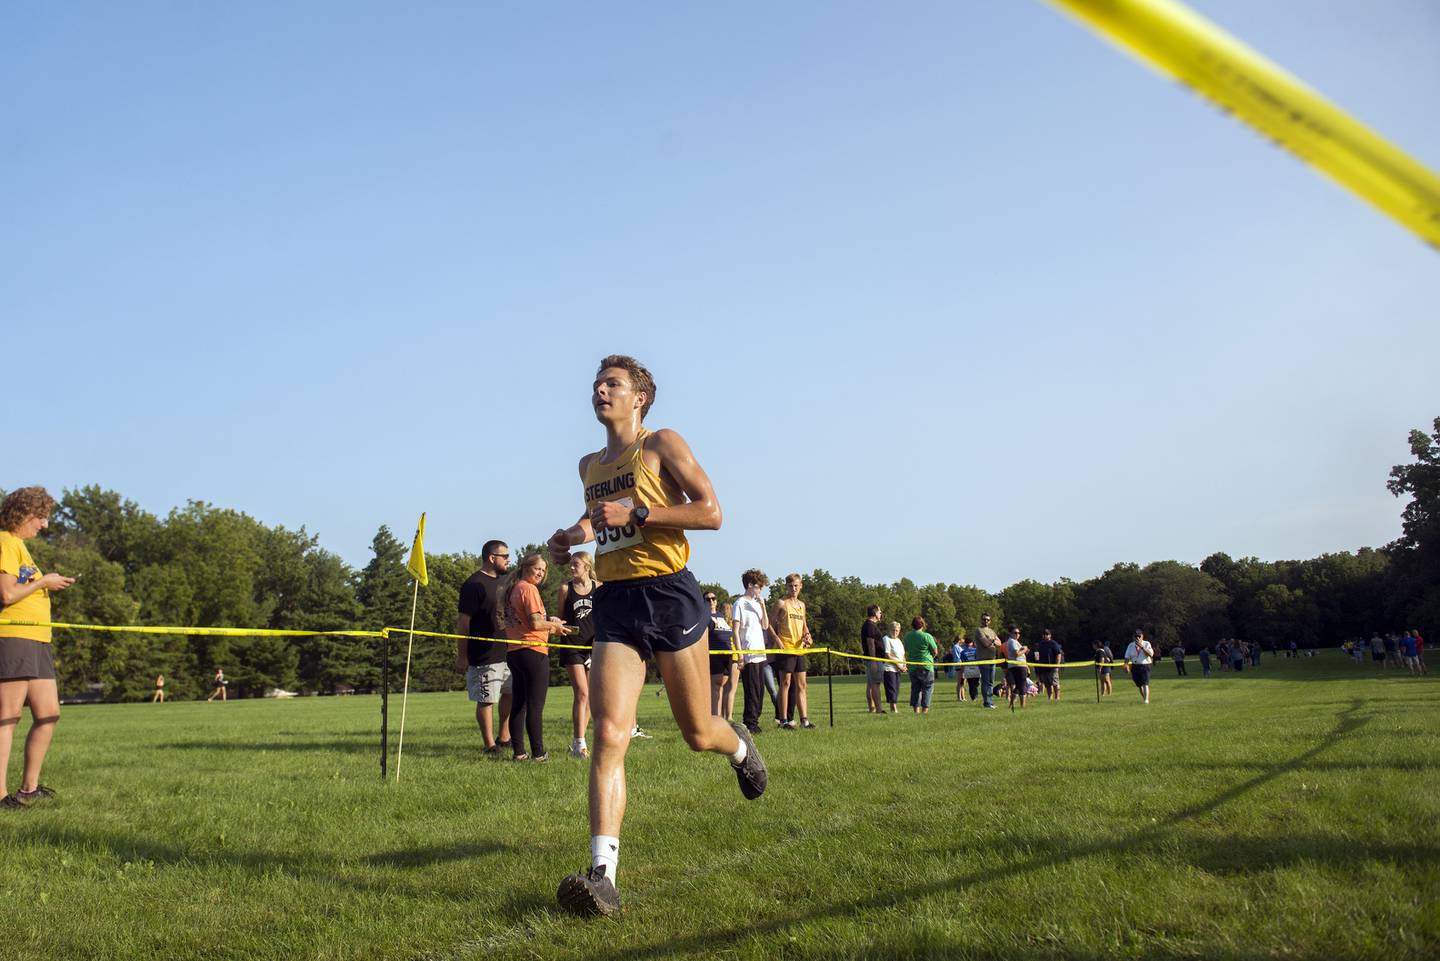 Dale Johnson of Sterling cruises to a win in the boy’s race of the Twin Cities cross country meet in Sterling, Sept. 13, 2022.